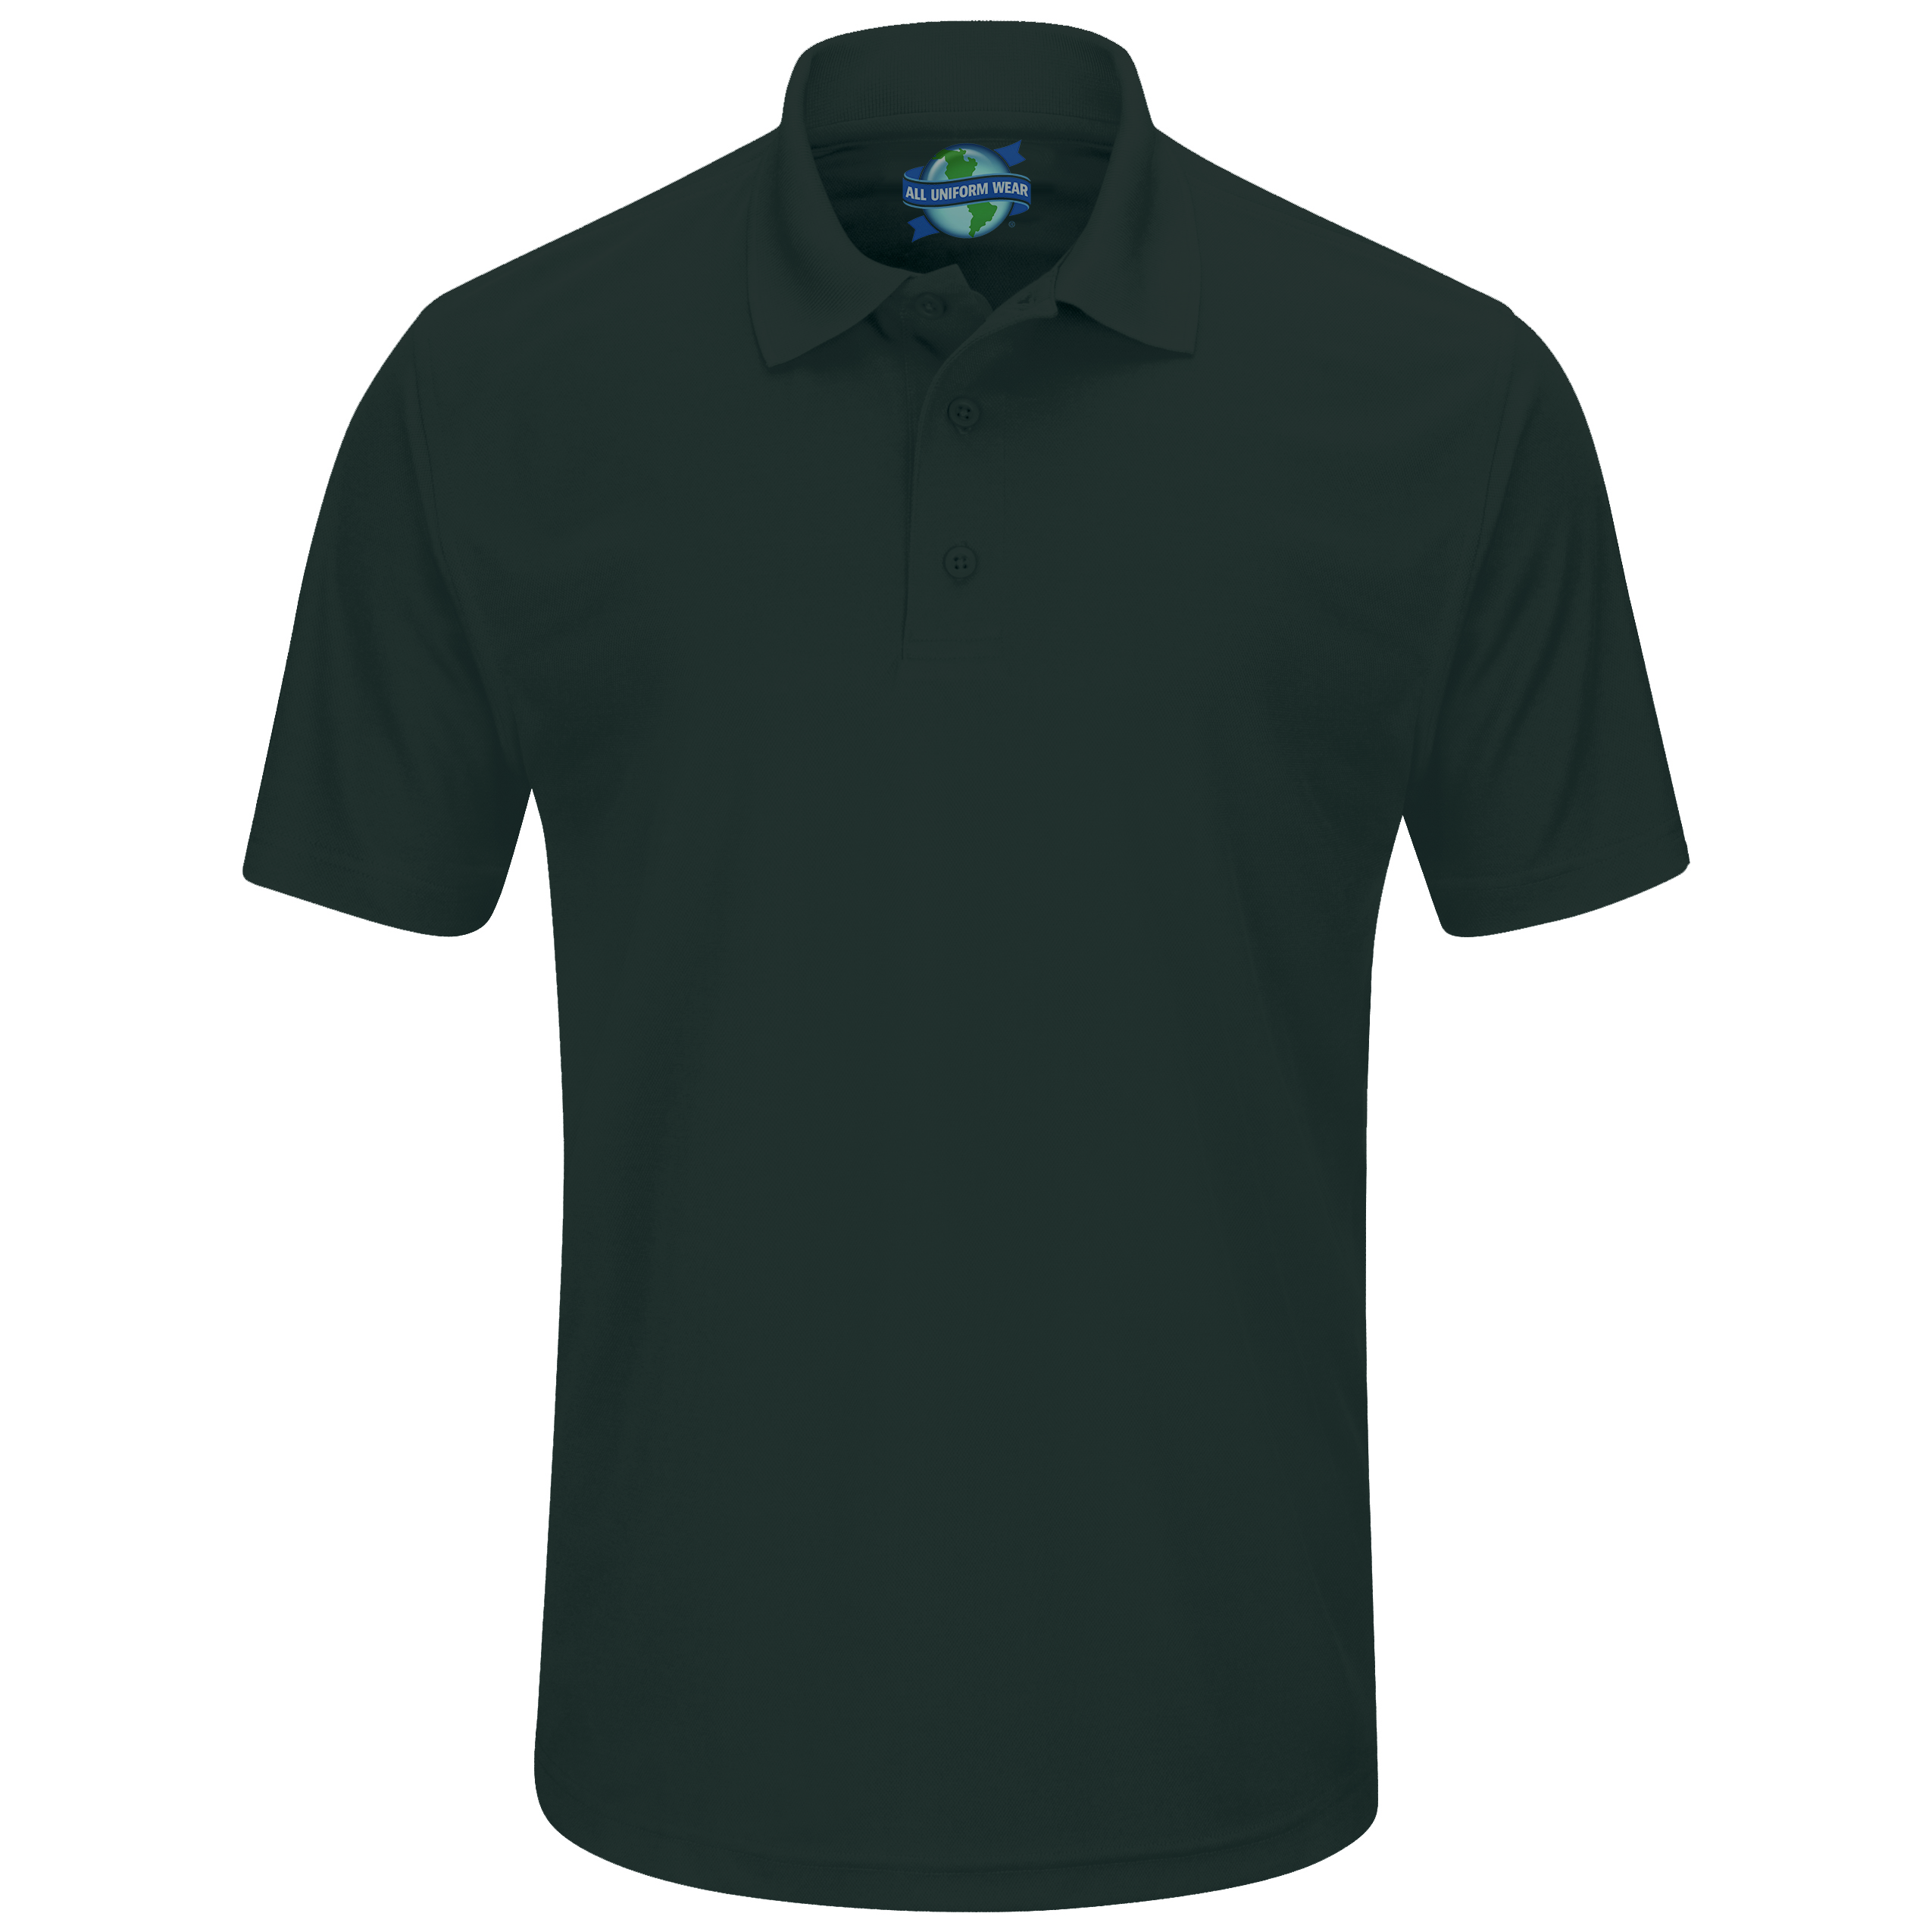 Buy AUW Universal Short Sleeve Pique Polo Shirt Online